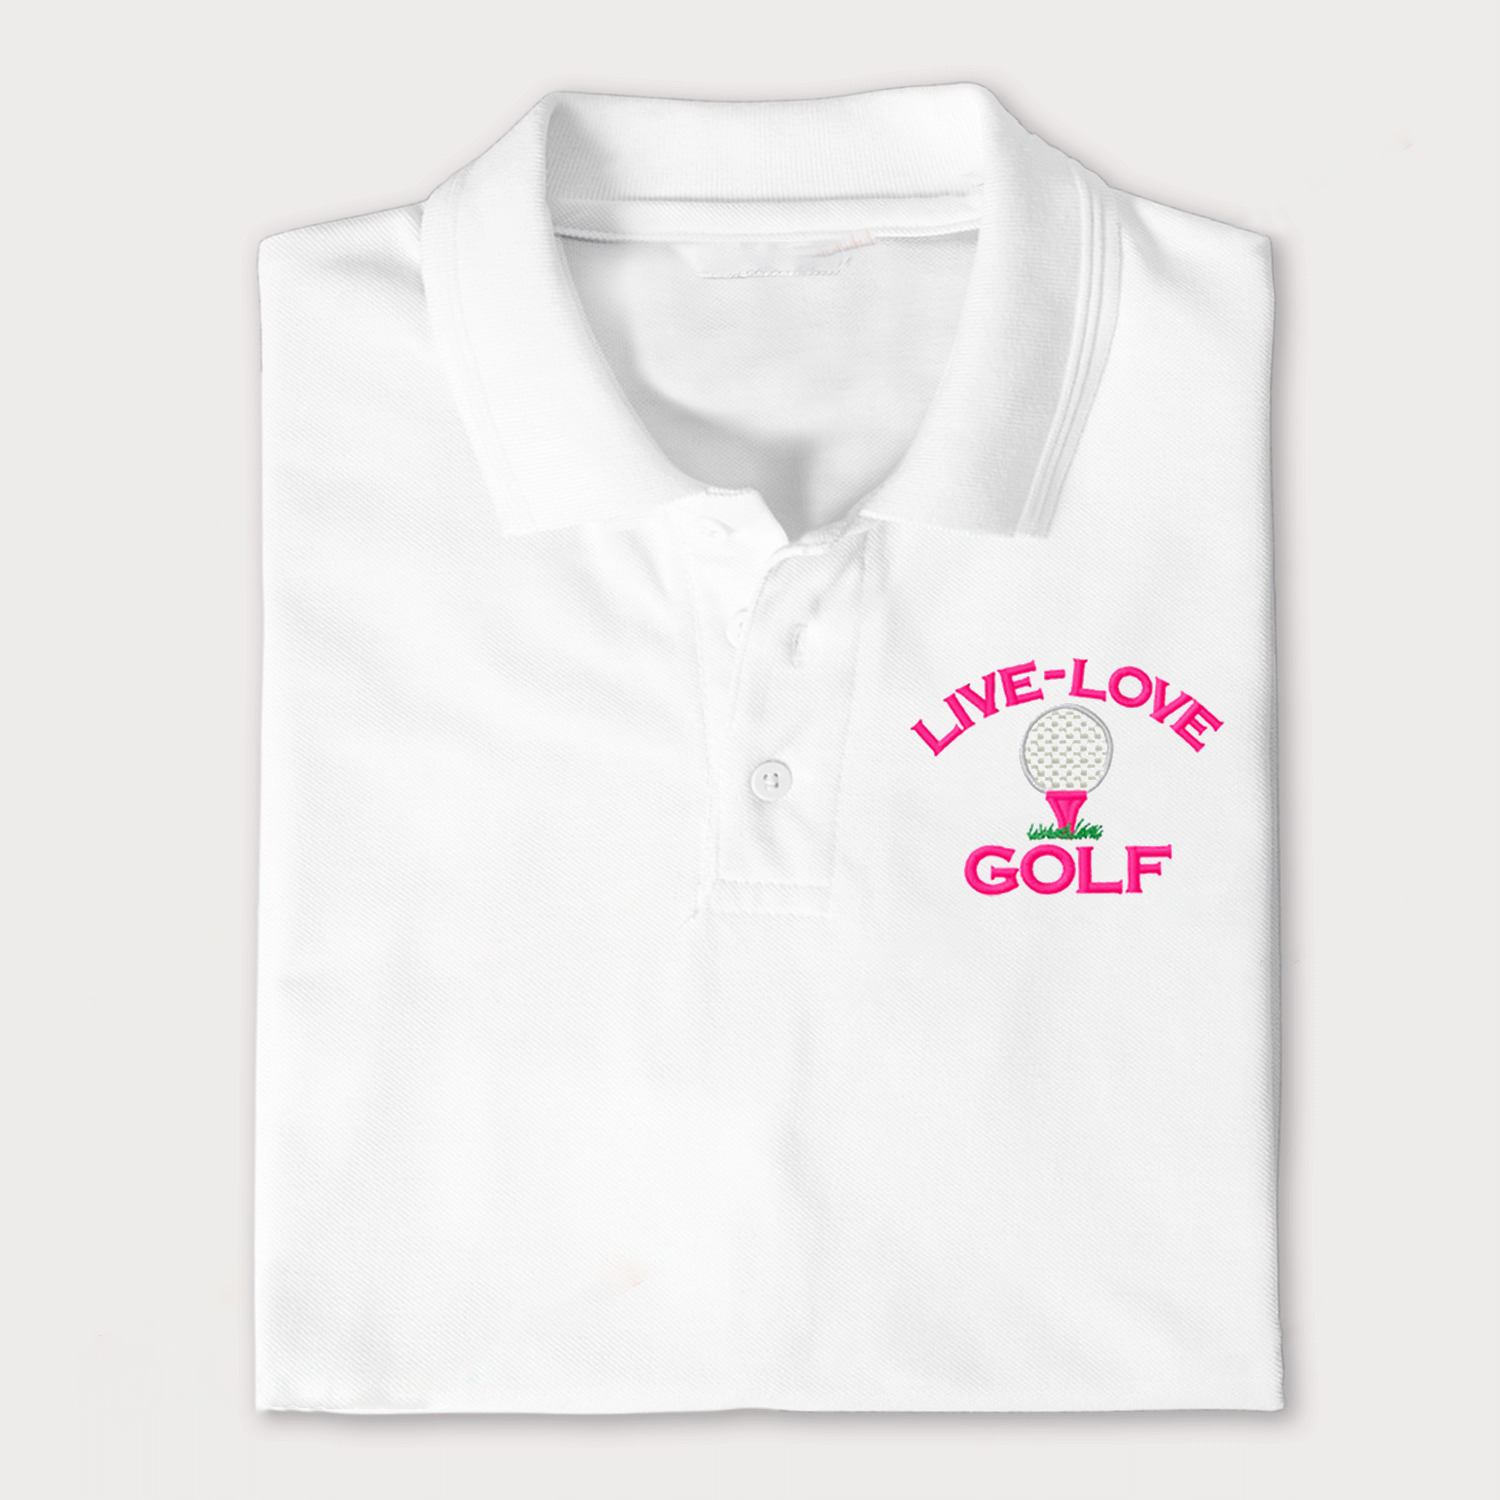 Live-Love Golf Shirts Embroidery Polo Shirts For Women Or Men/ Golf Embroidery Shirt